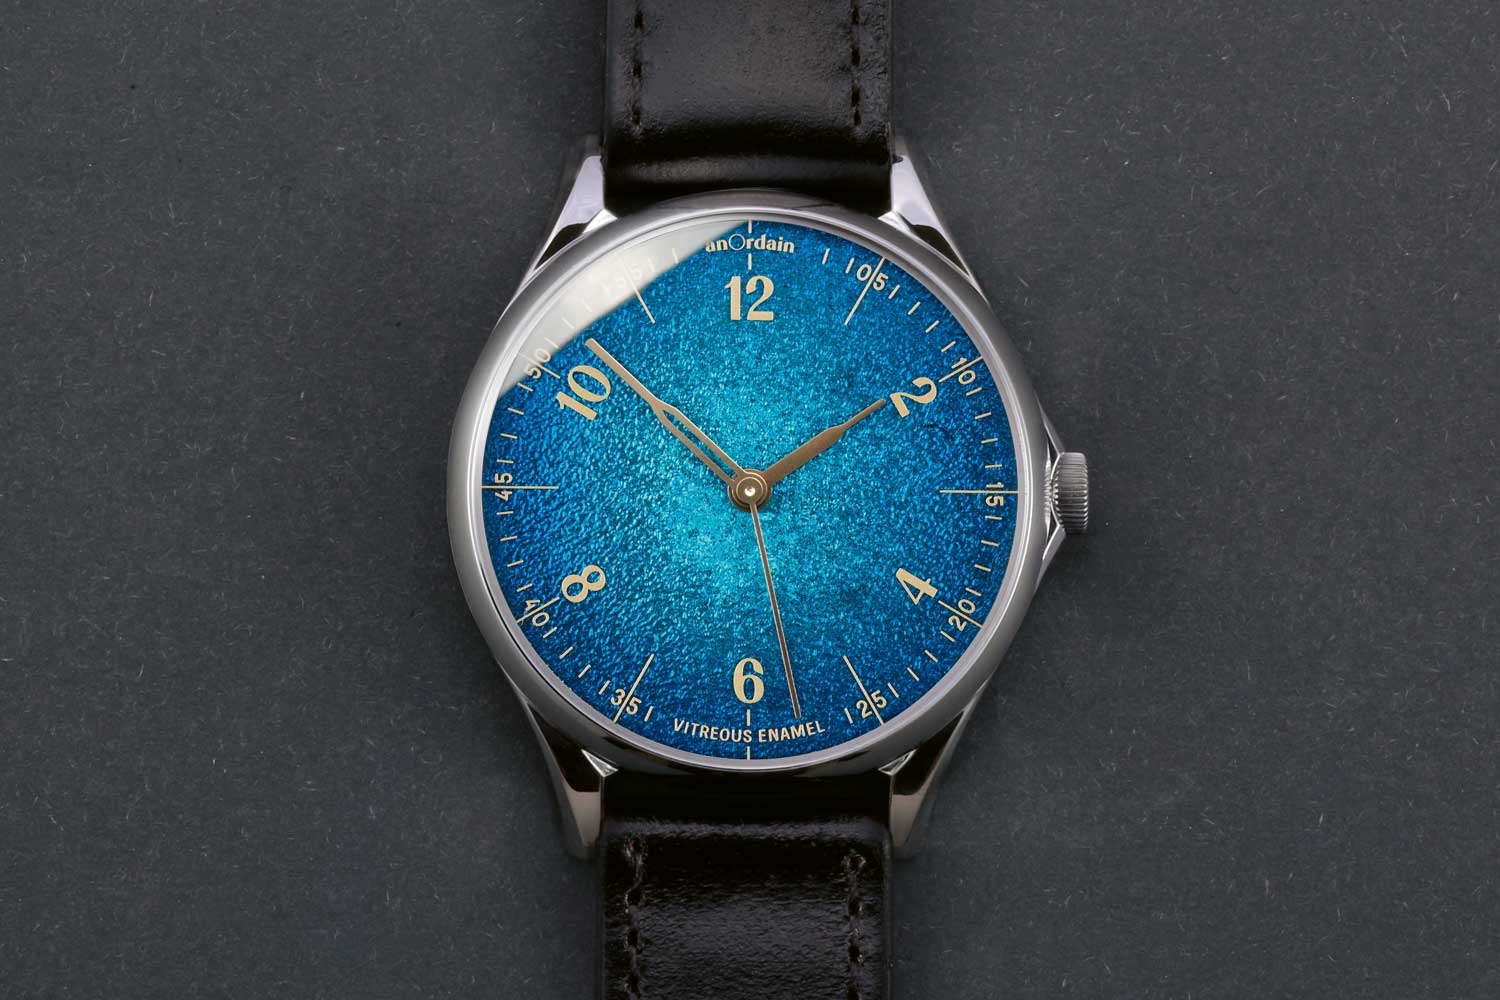 The star of anOrdain’s watches is the rapturous, unparalleled enameling on the dials